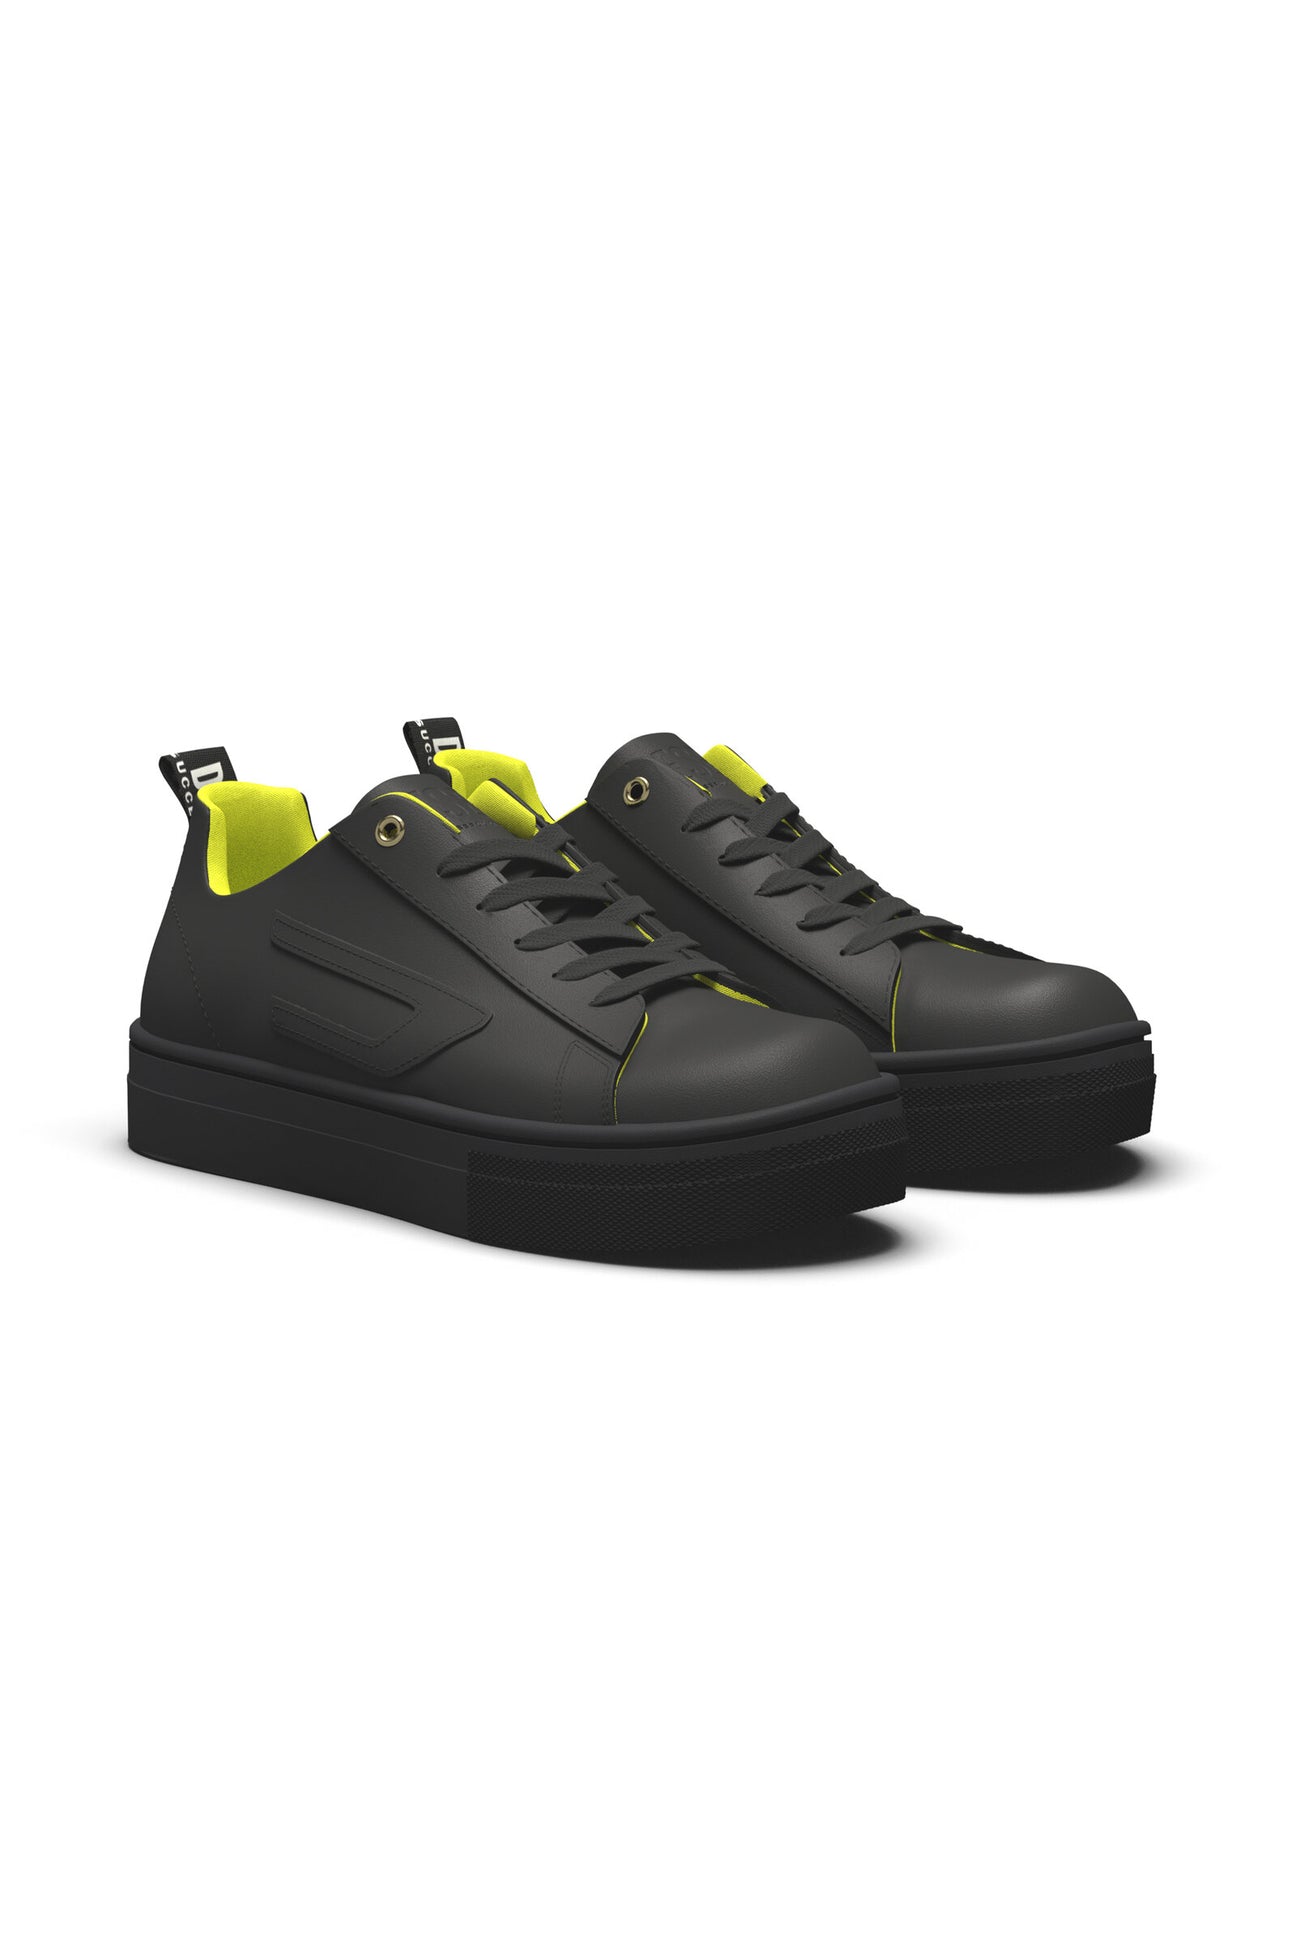 Black leather sneakers with embossed D Black leather sneakers with embossed D